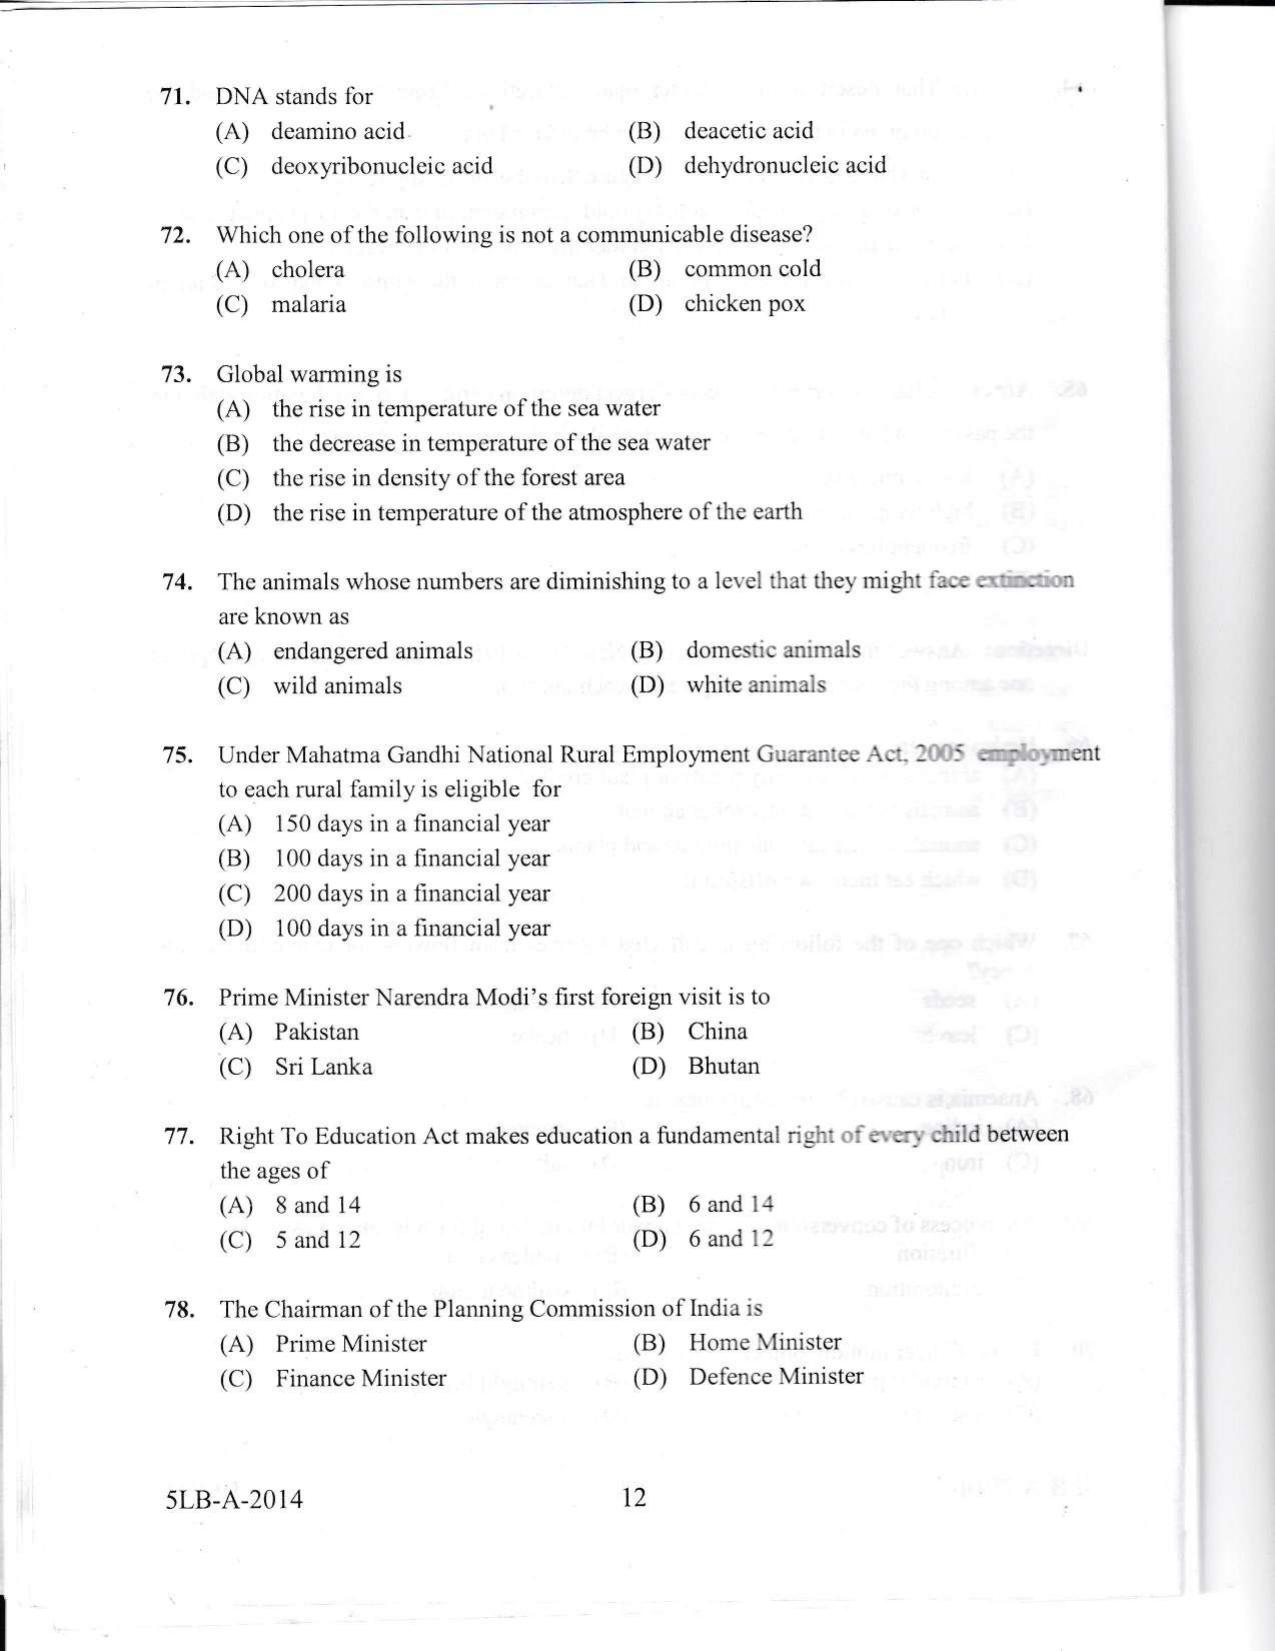 KLEE 5 Year LLB Exam 2014 Question Paper - Page 12